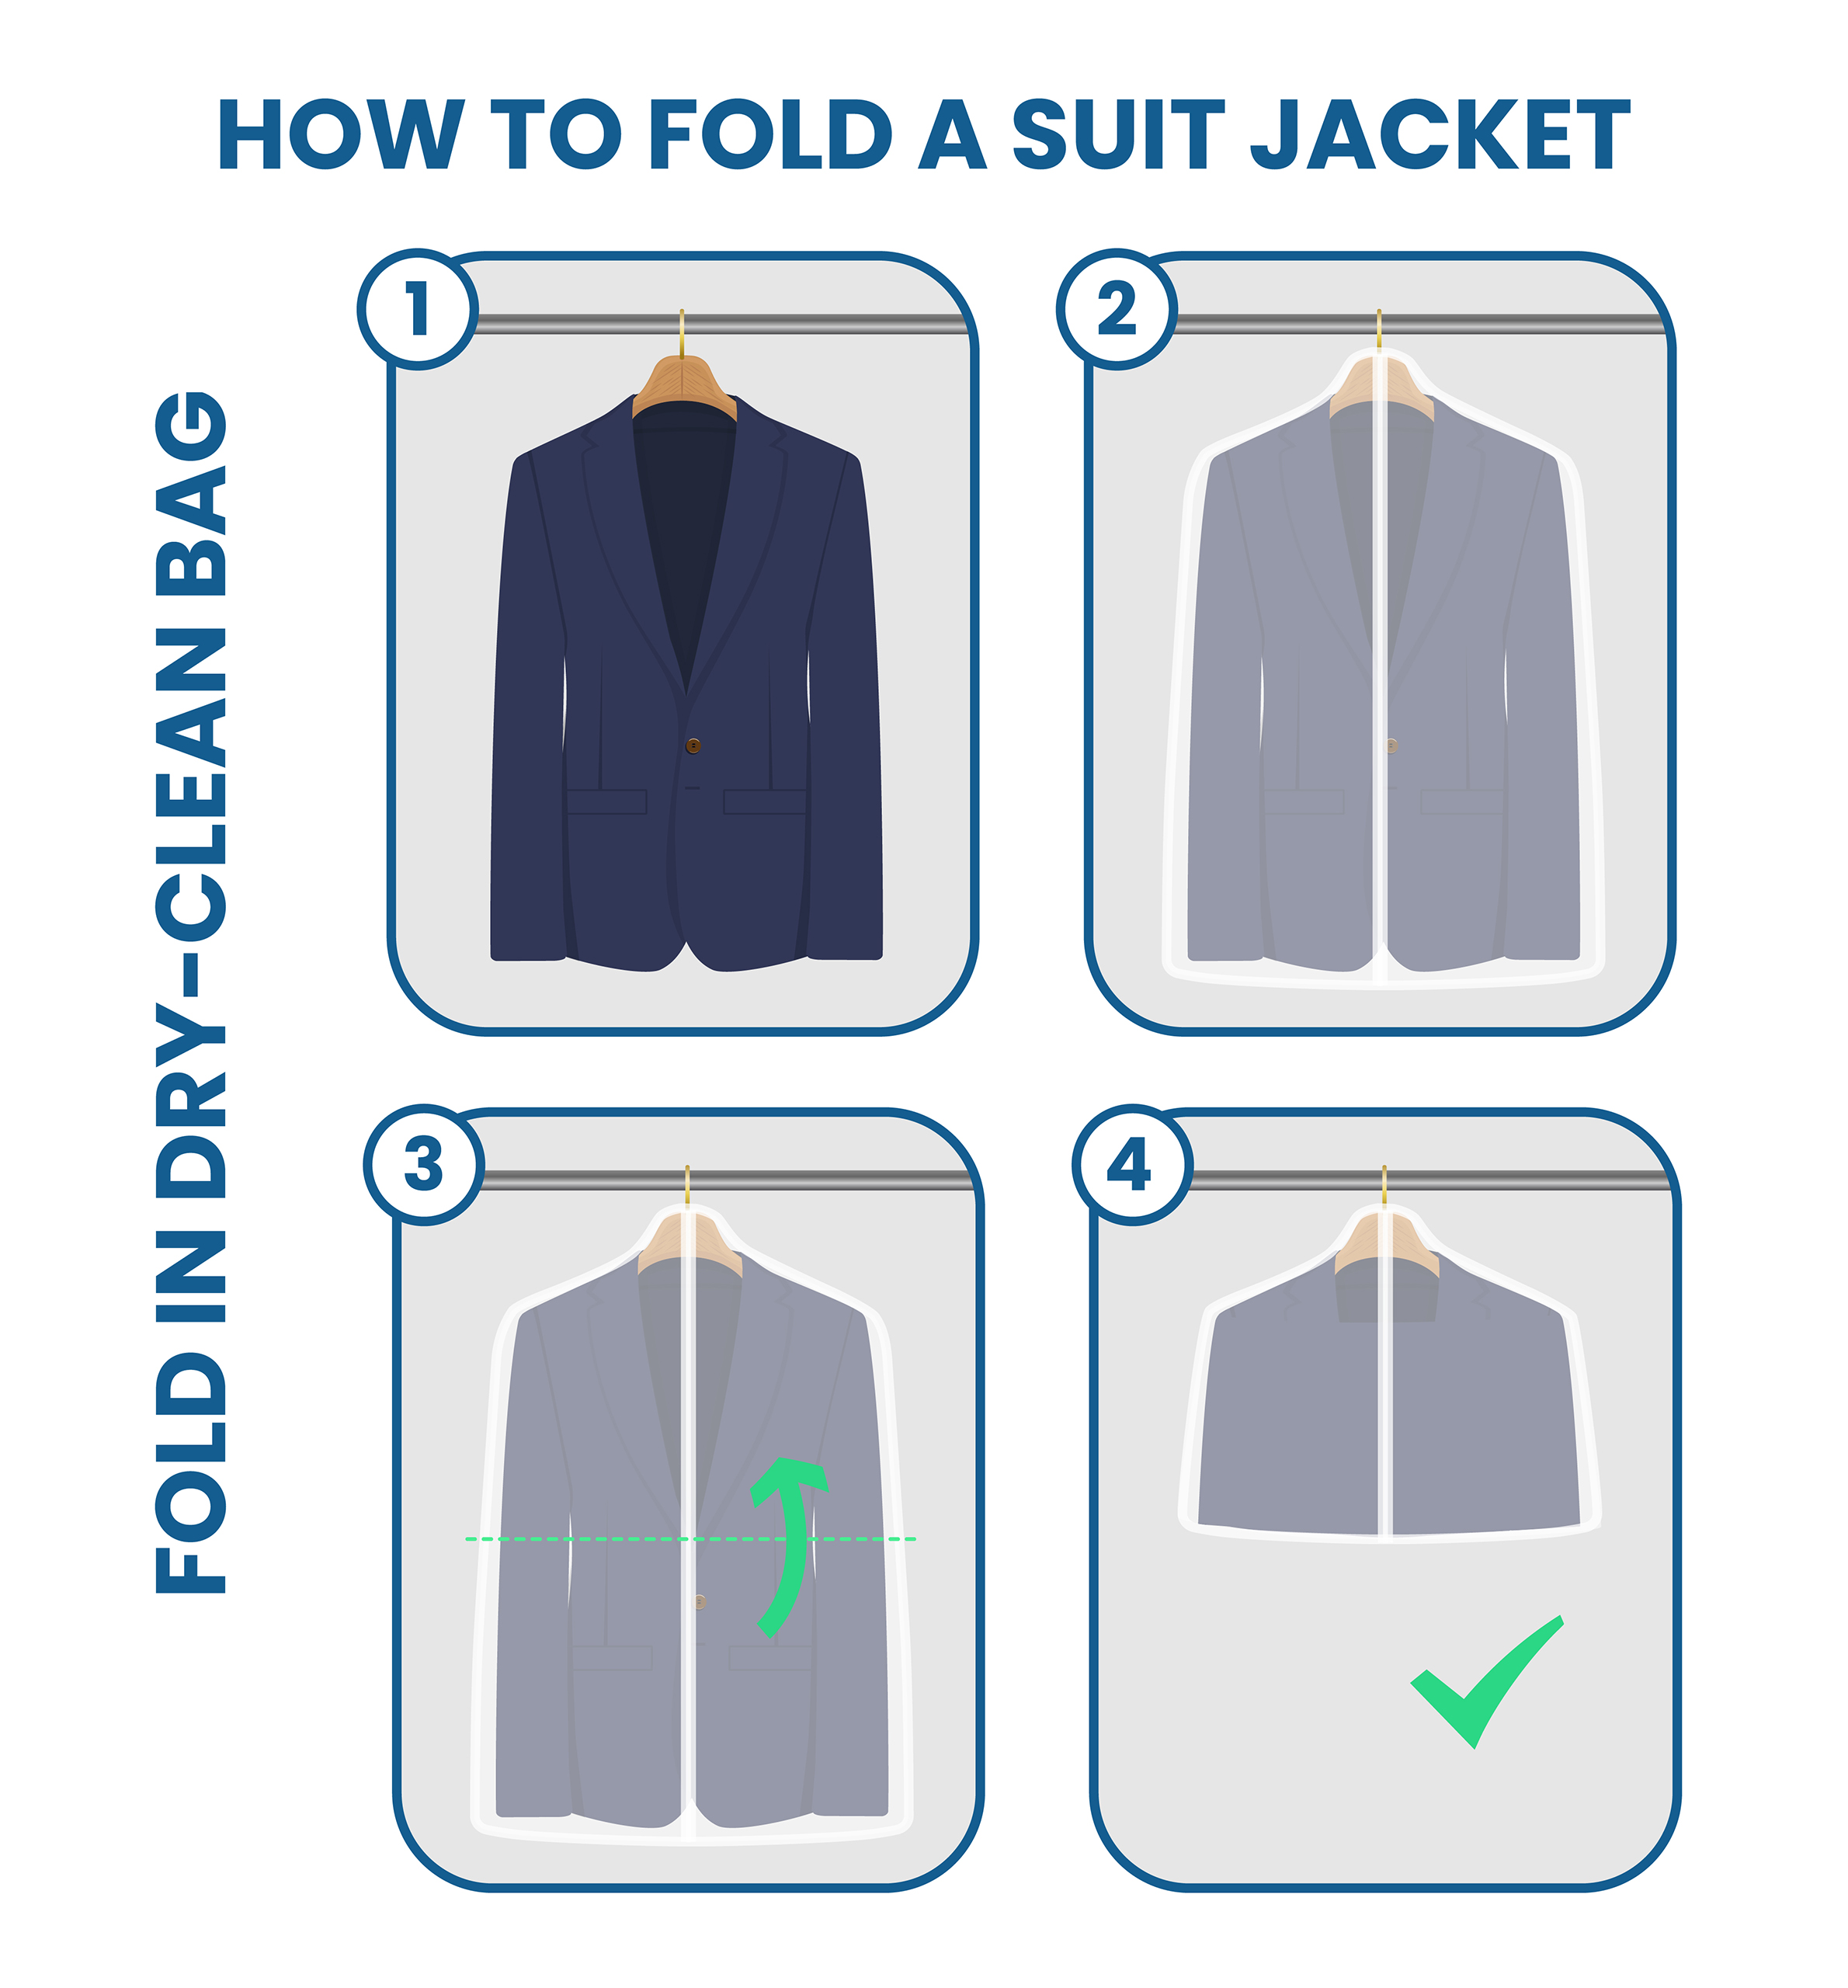 5 Easy Methods to Fold and Pack a Suit Into a Suitcase - Suits Expert